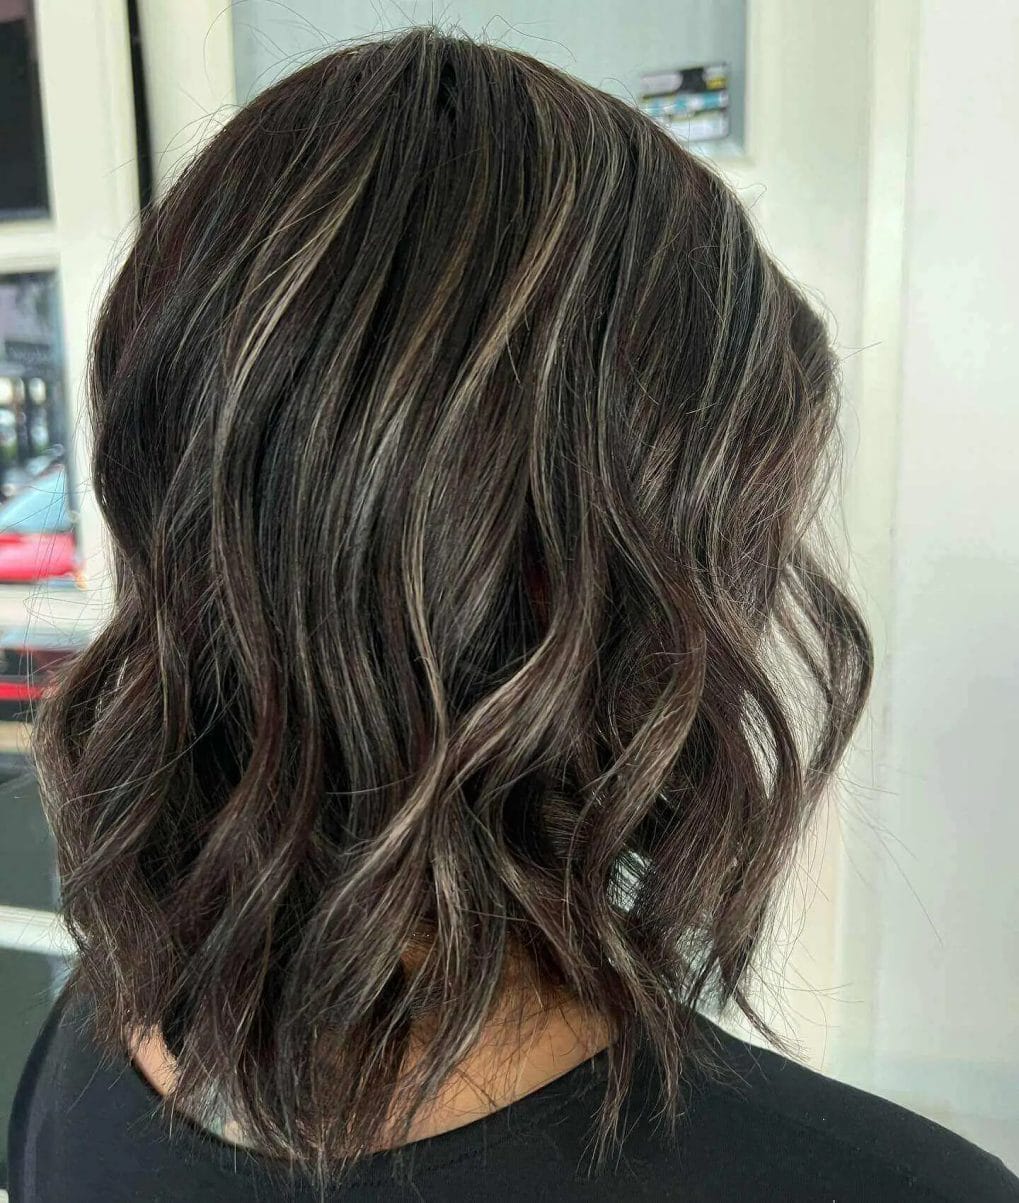 Textured bob with precision-cut layers blending gray hair.